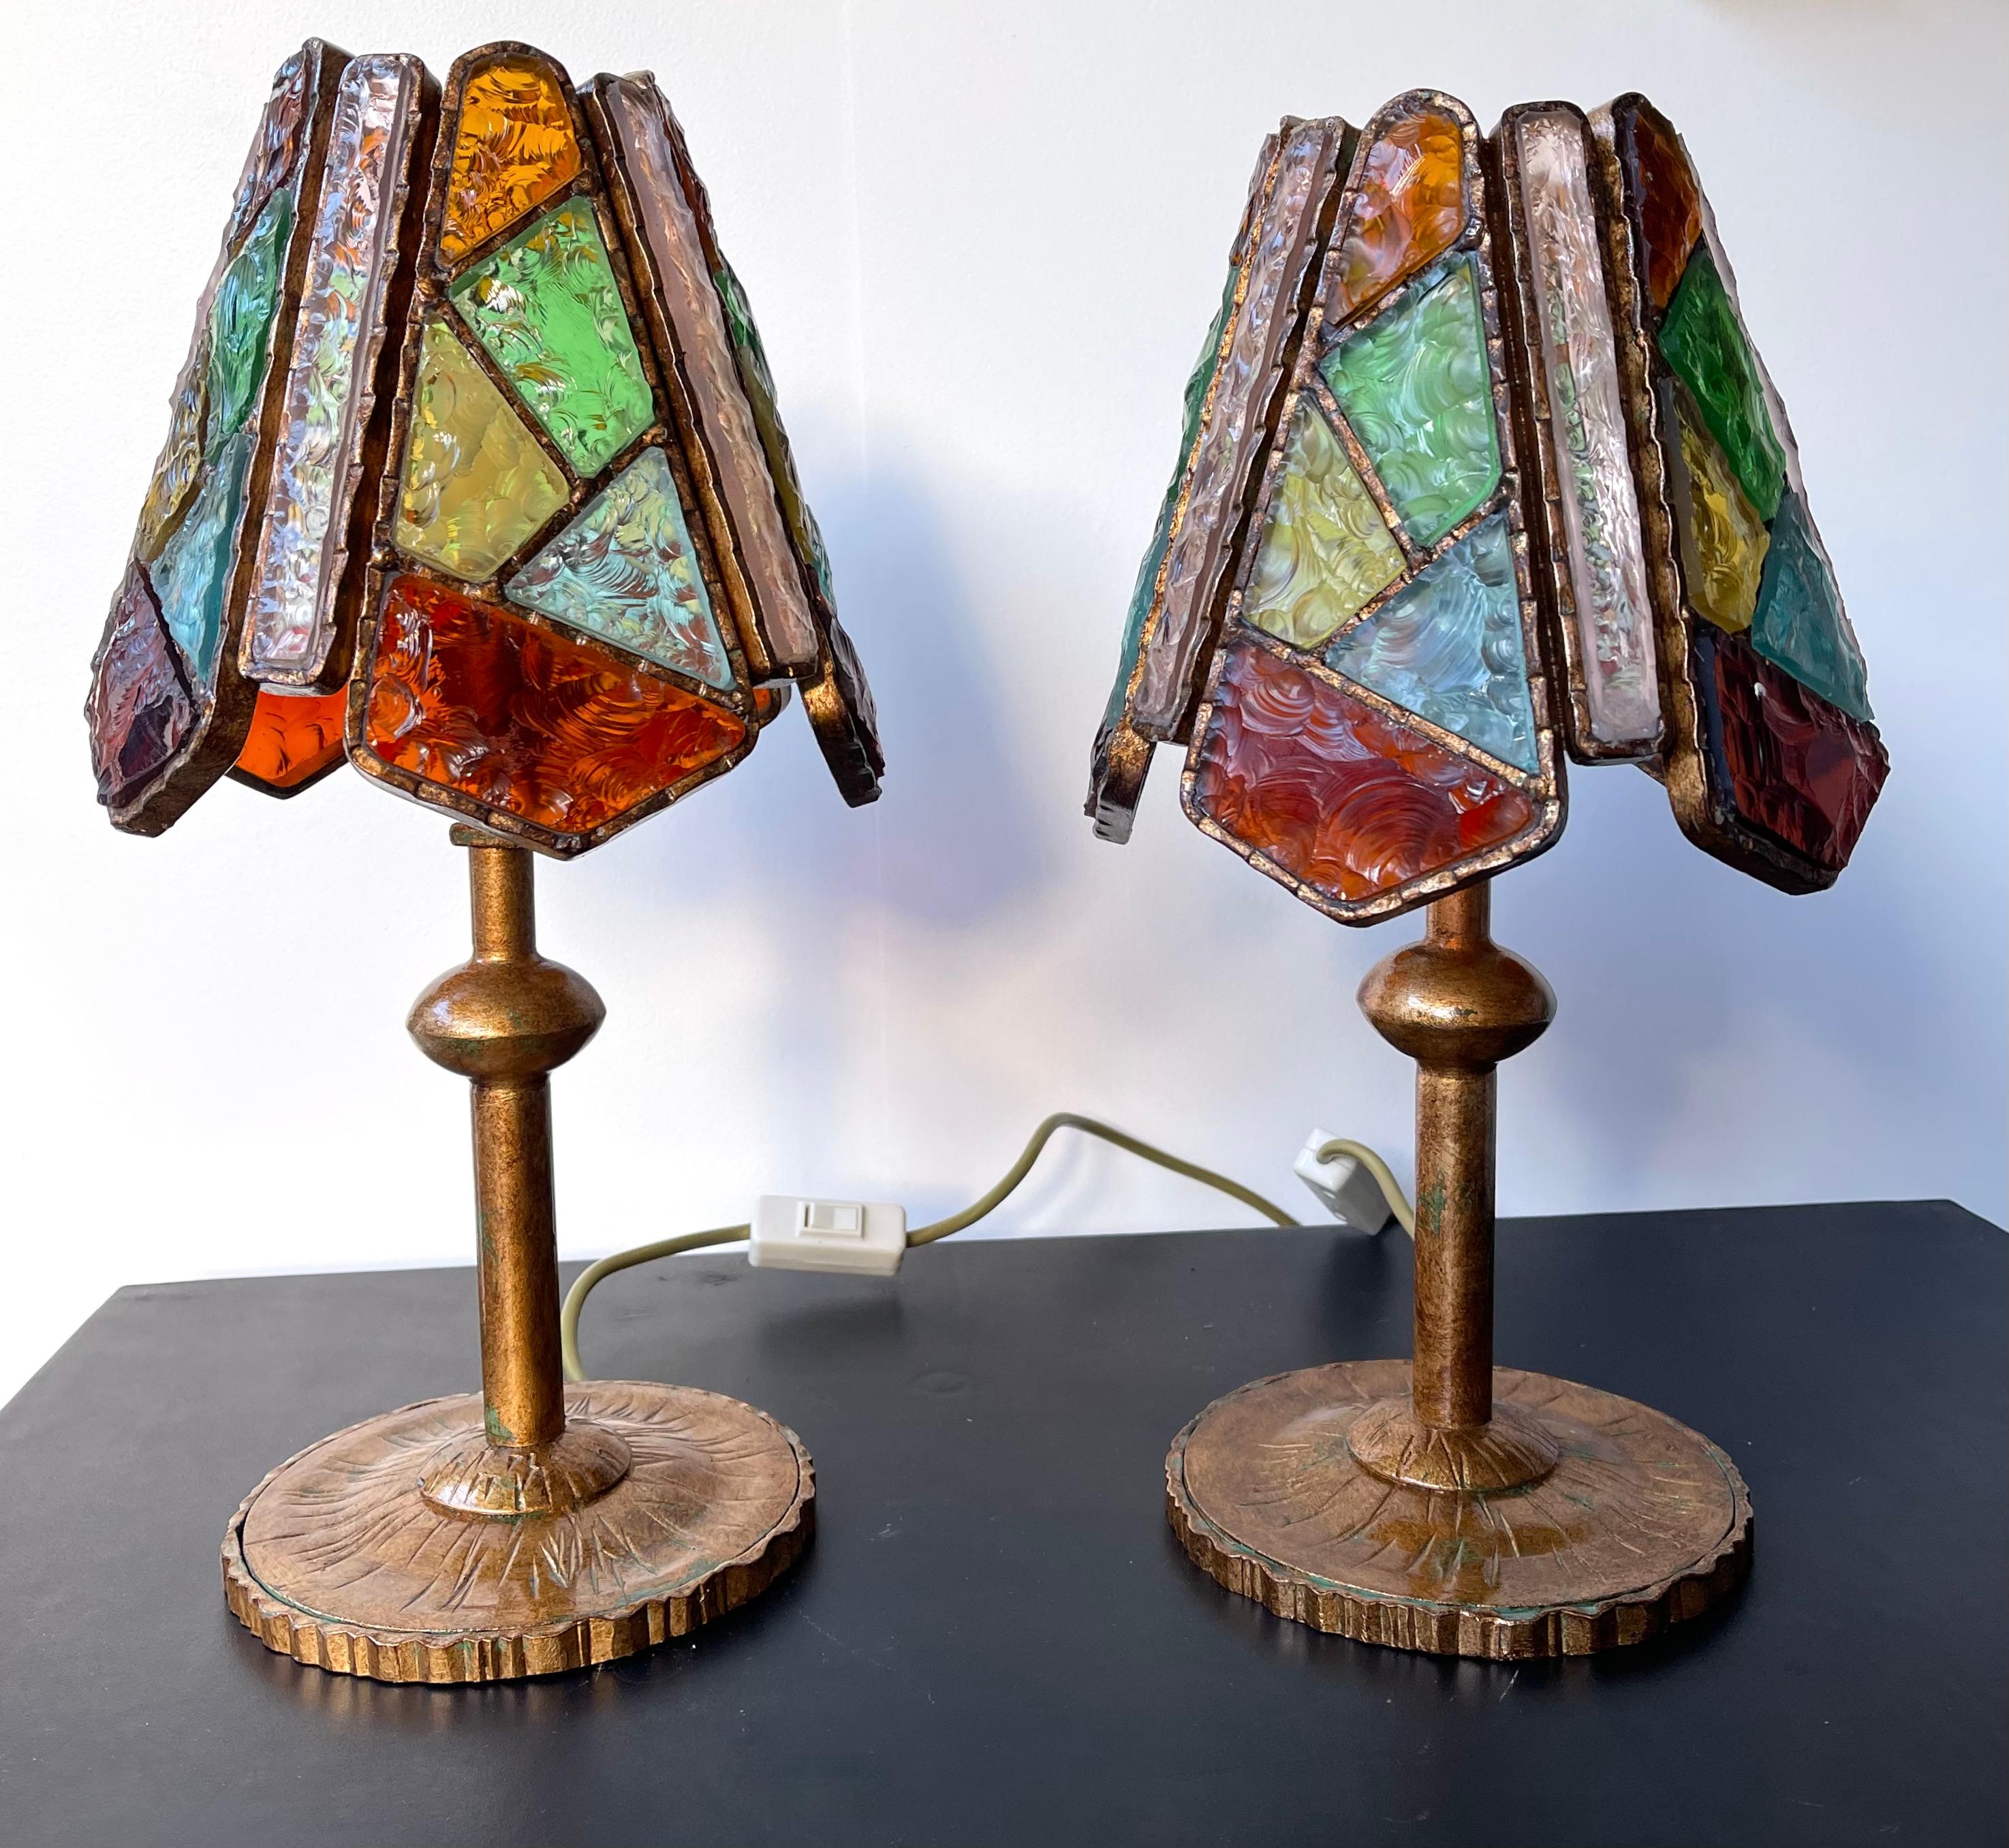 Pair of Hammered Glass Wrought Iron Lamps by Longobard, Italy, 1970s For Sale 2